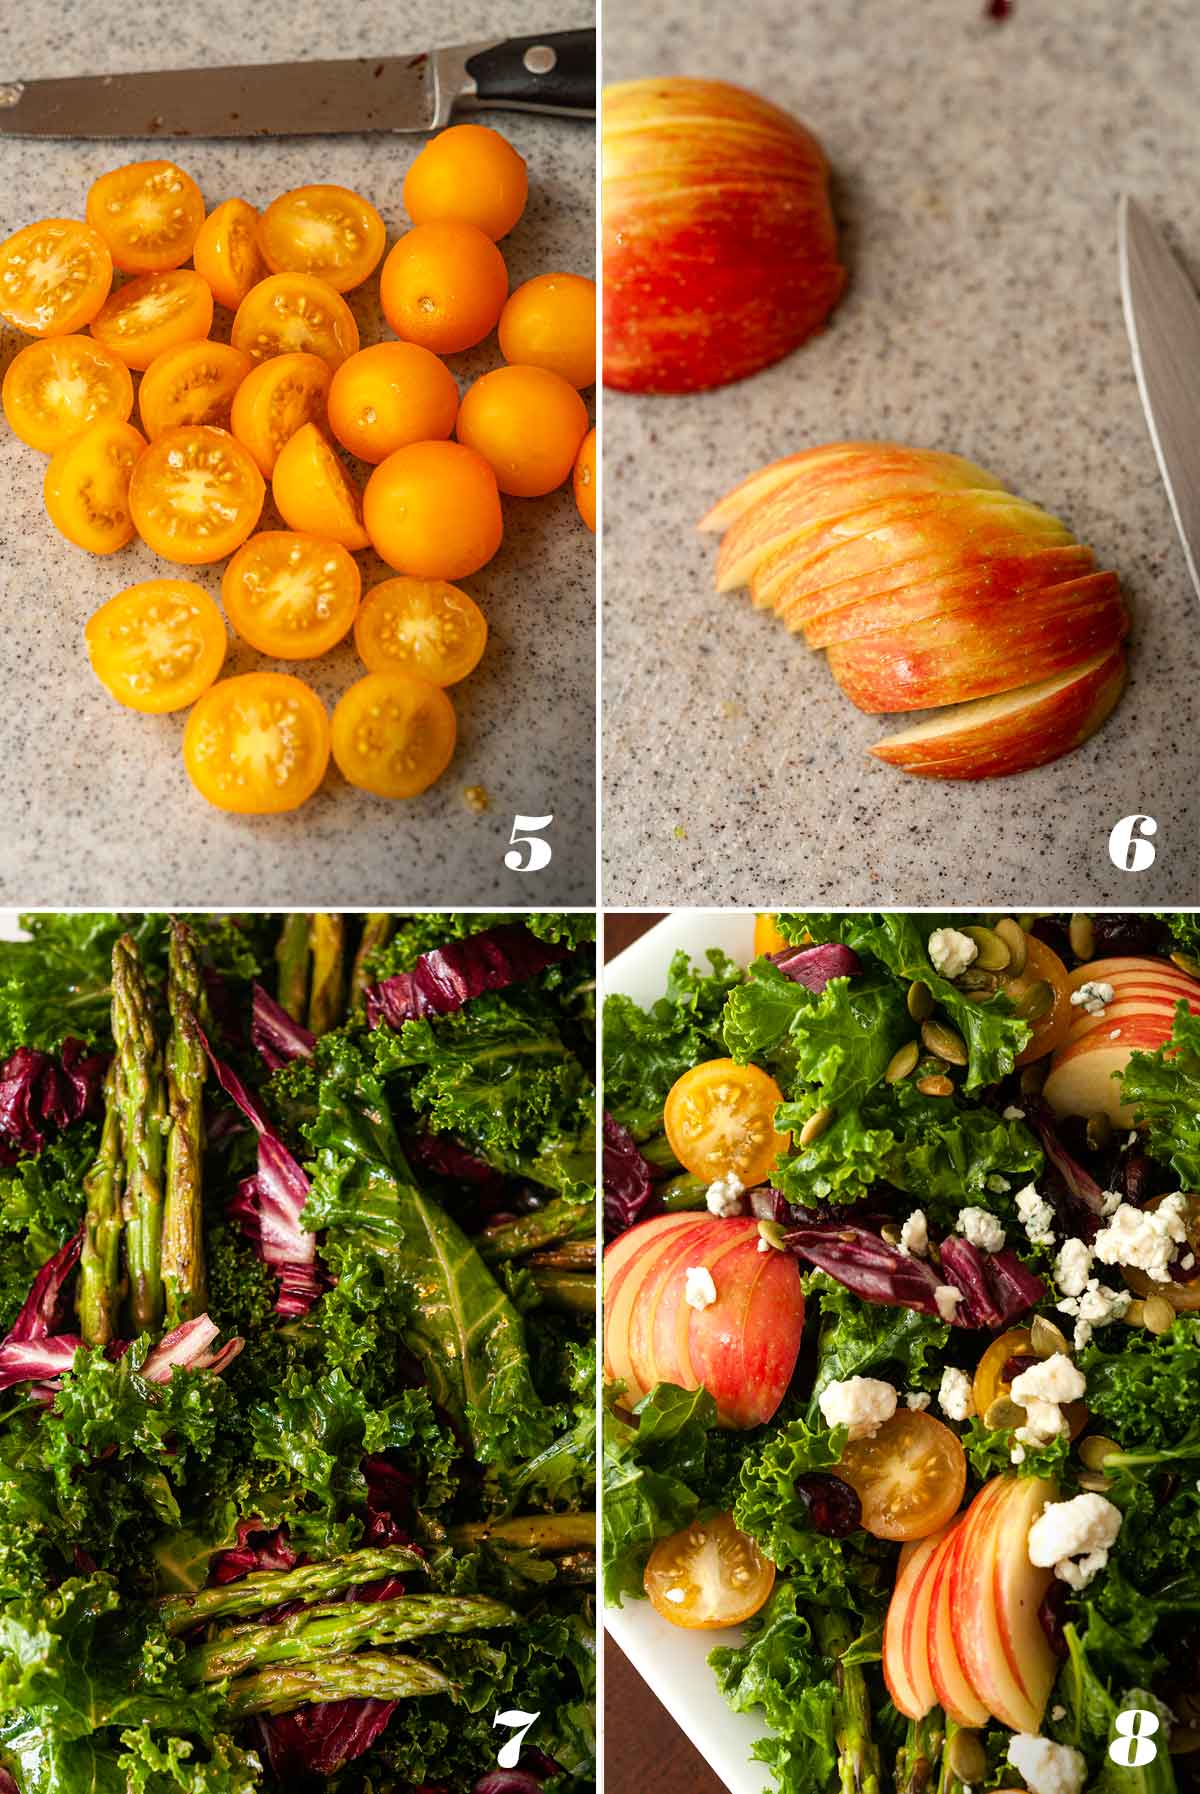 A collage of 4 numbered images showing how to assemble an apple salad.